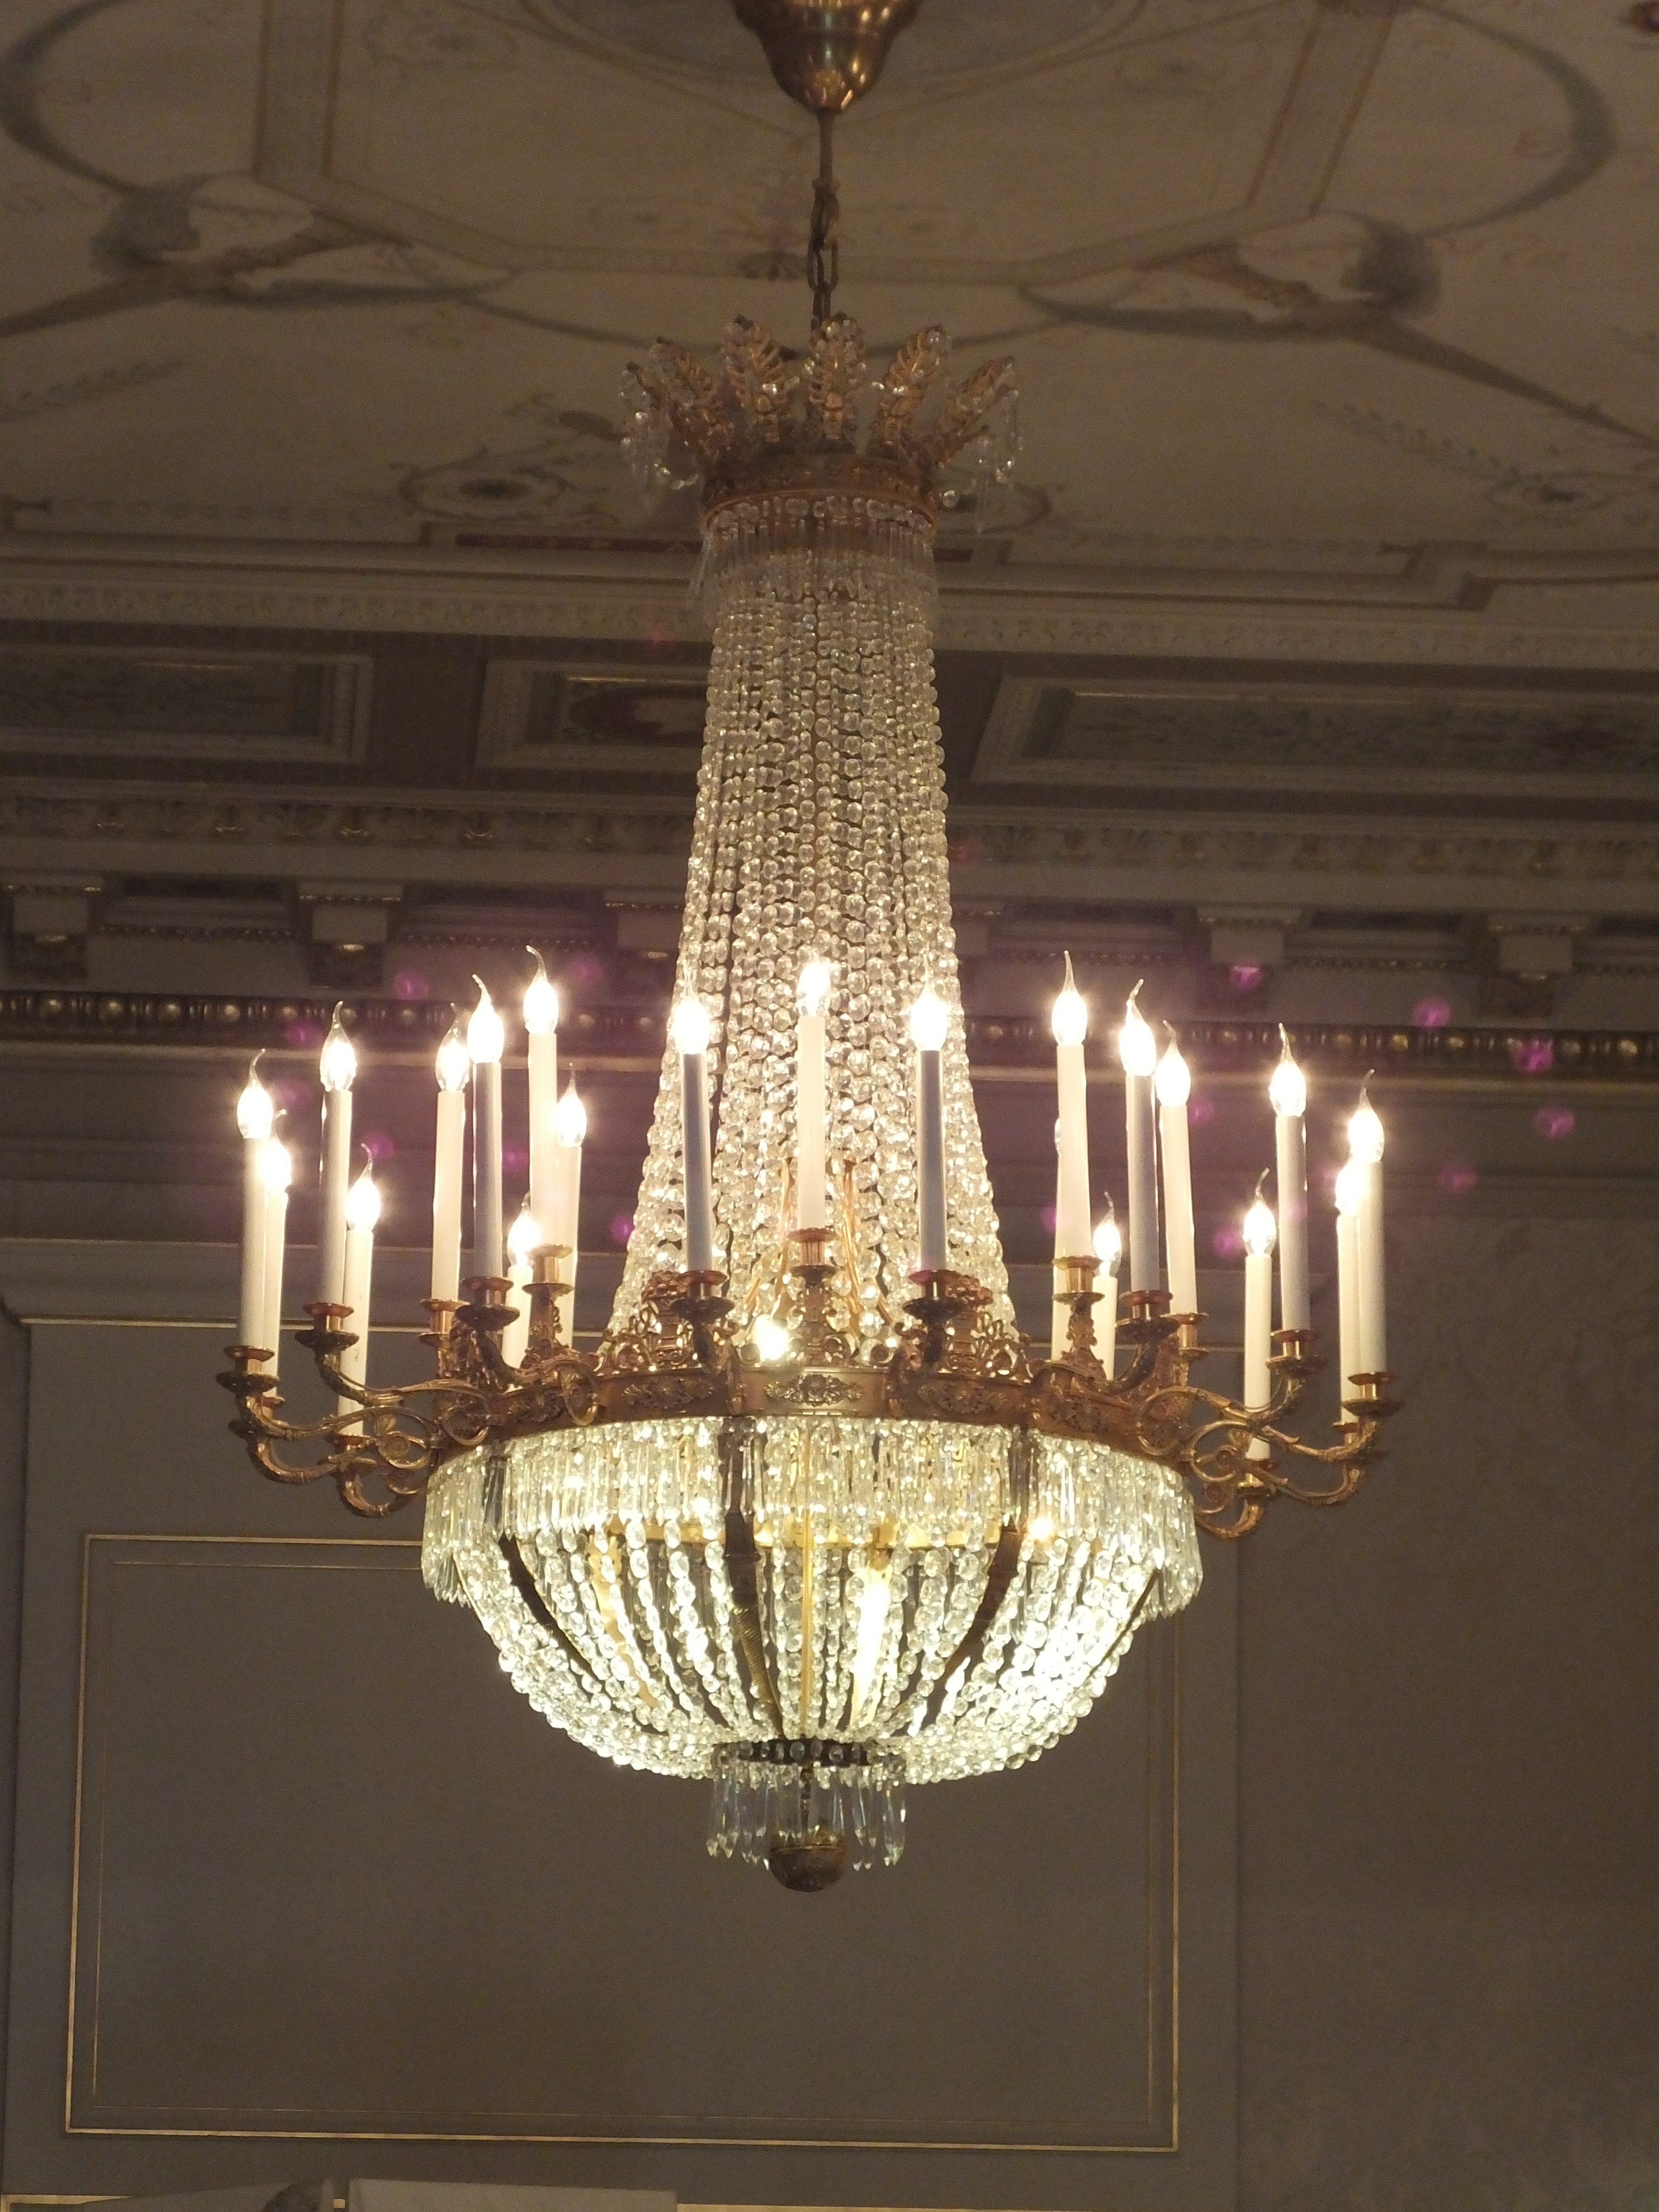 Gorgeous chandeliers